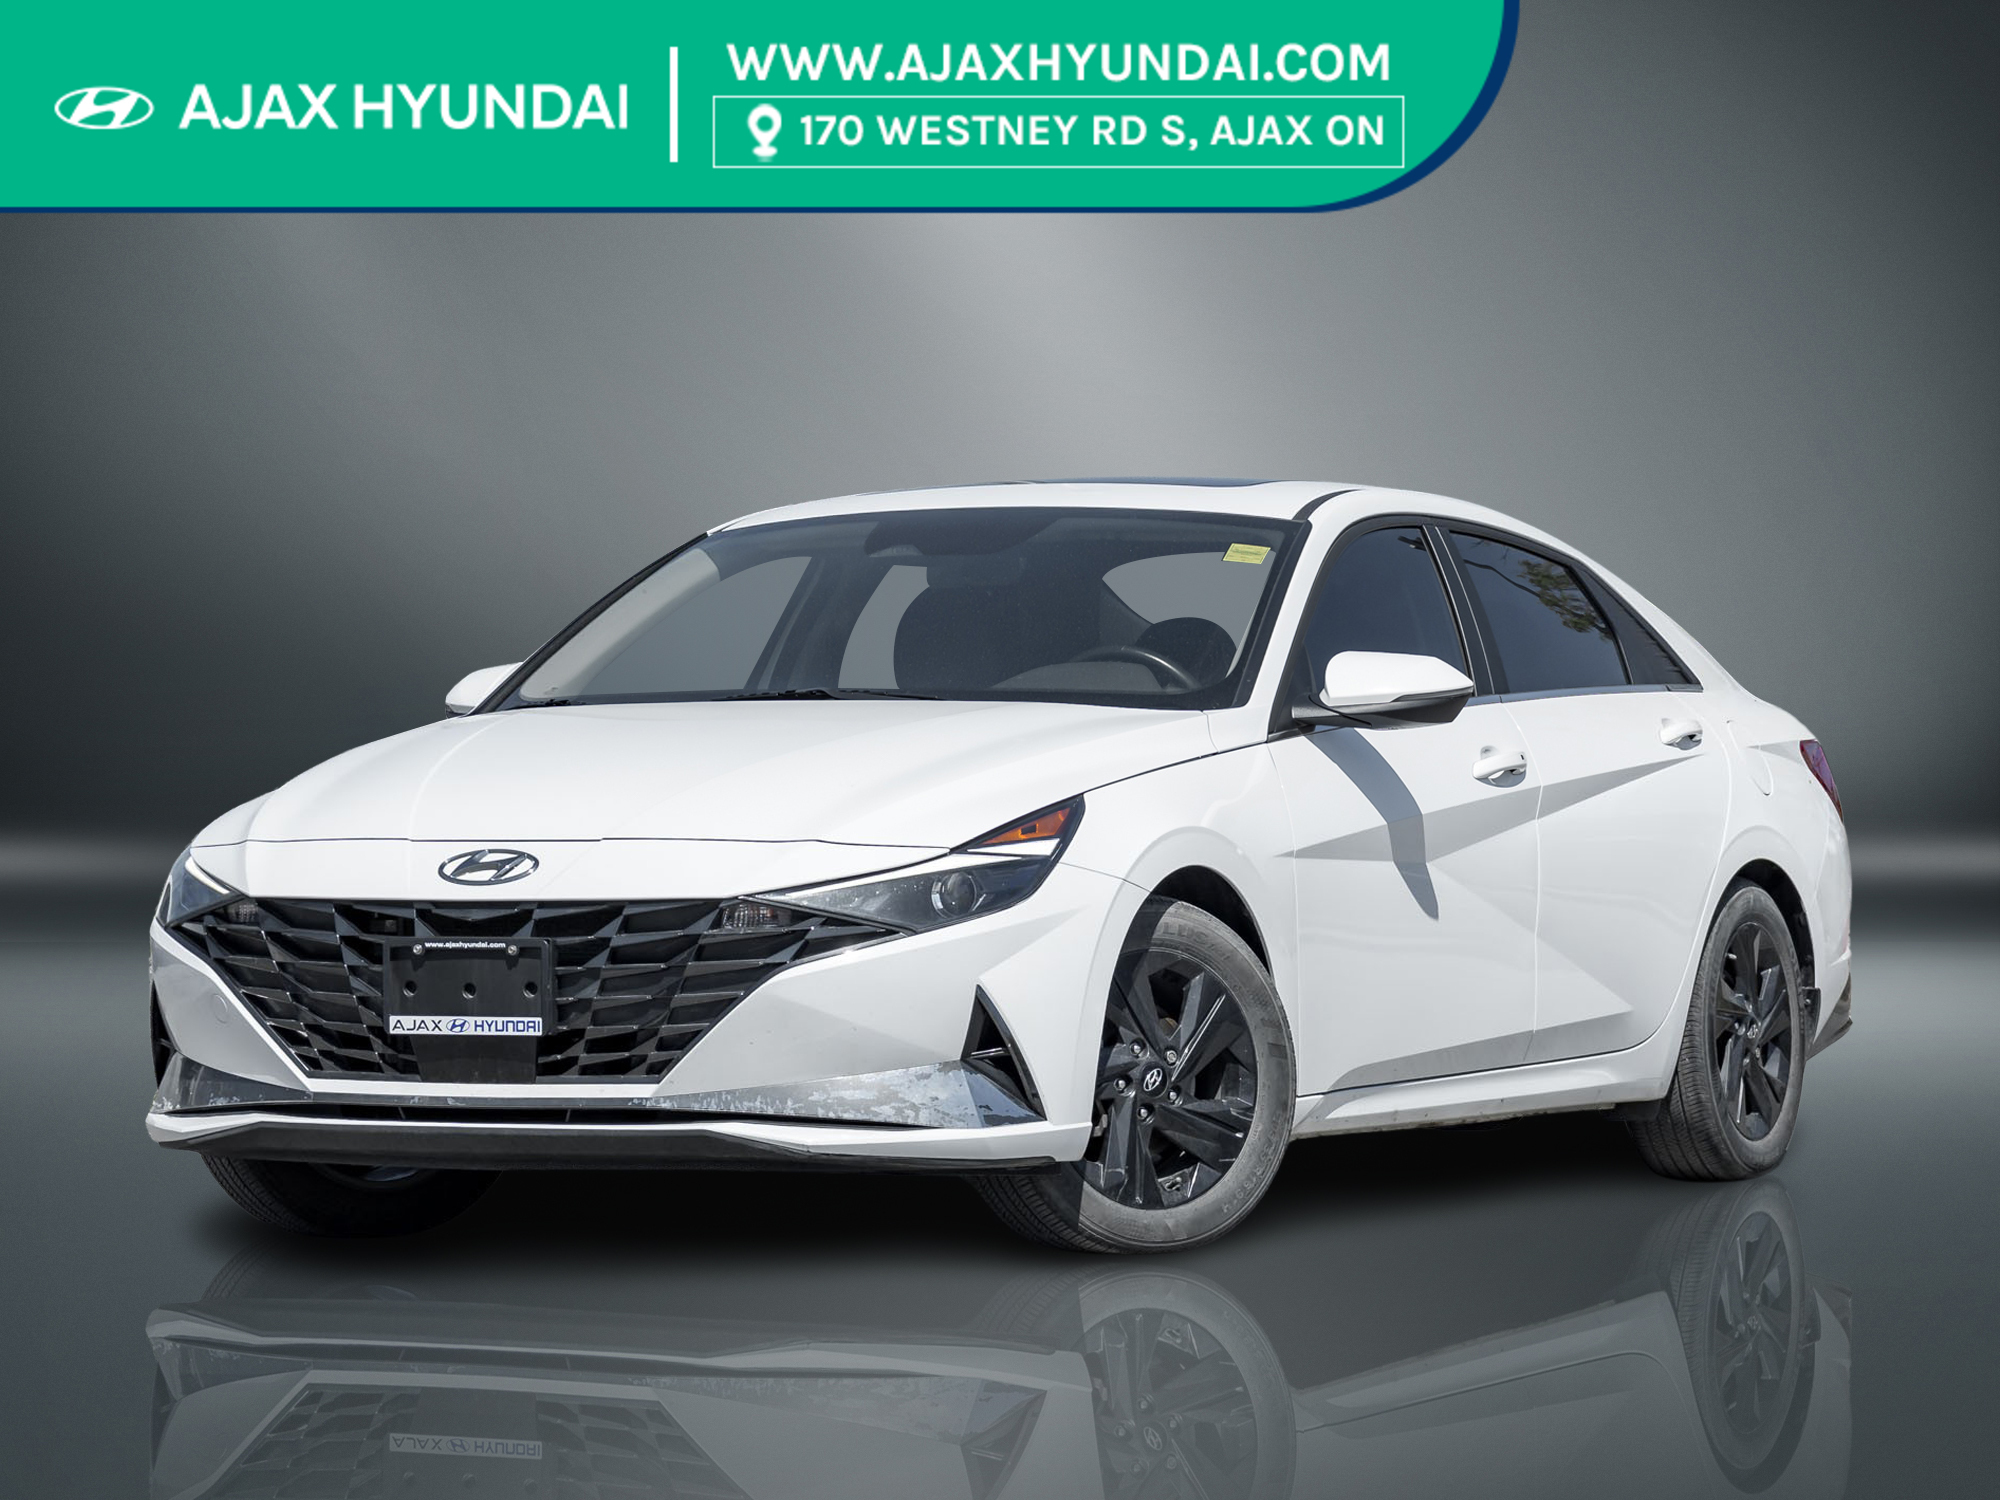 2021 Hyundai Elantra Hybrid ULTIMATE | RATES FROM 4.99% ULTIMATE | RATES FROM 